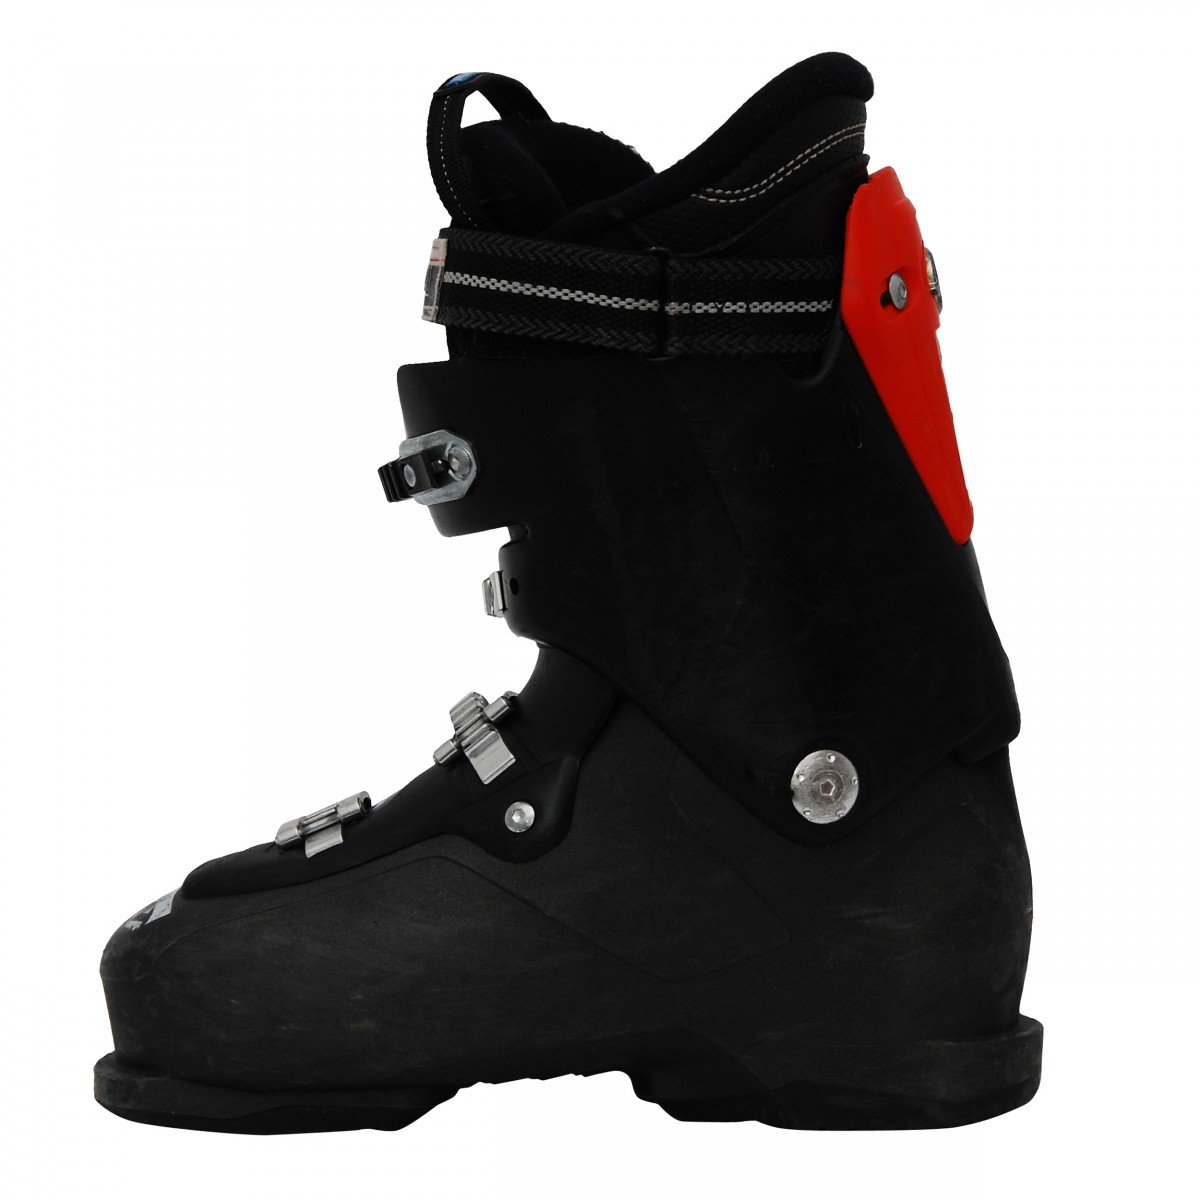 $350 Mens Nordica NXT X80R Black Red Ski Boots X 80 R Used See Listing for Sizes 